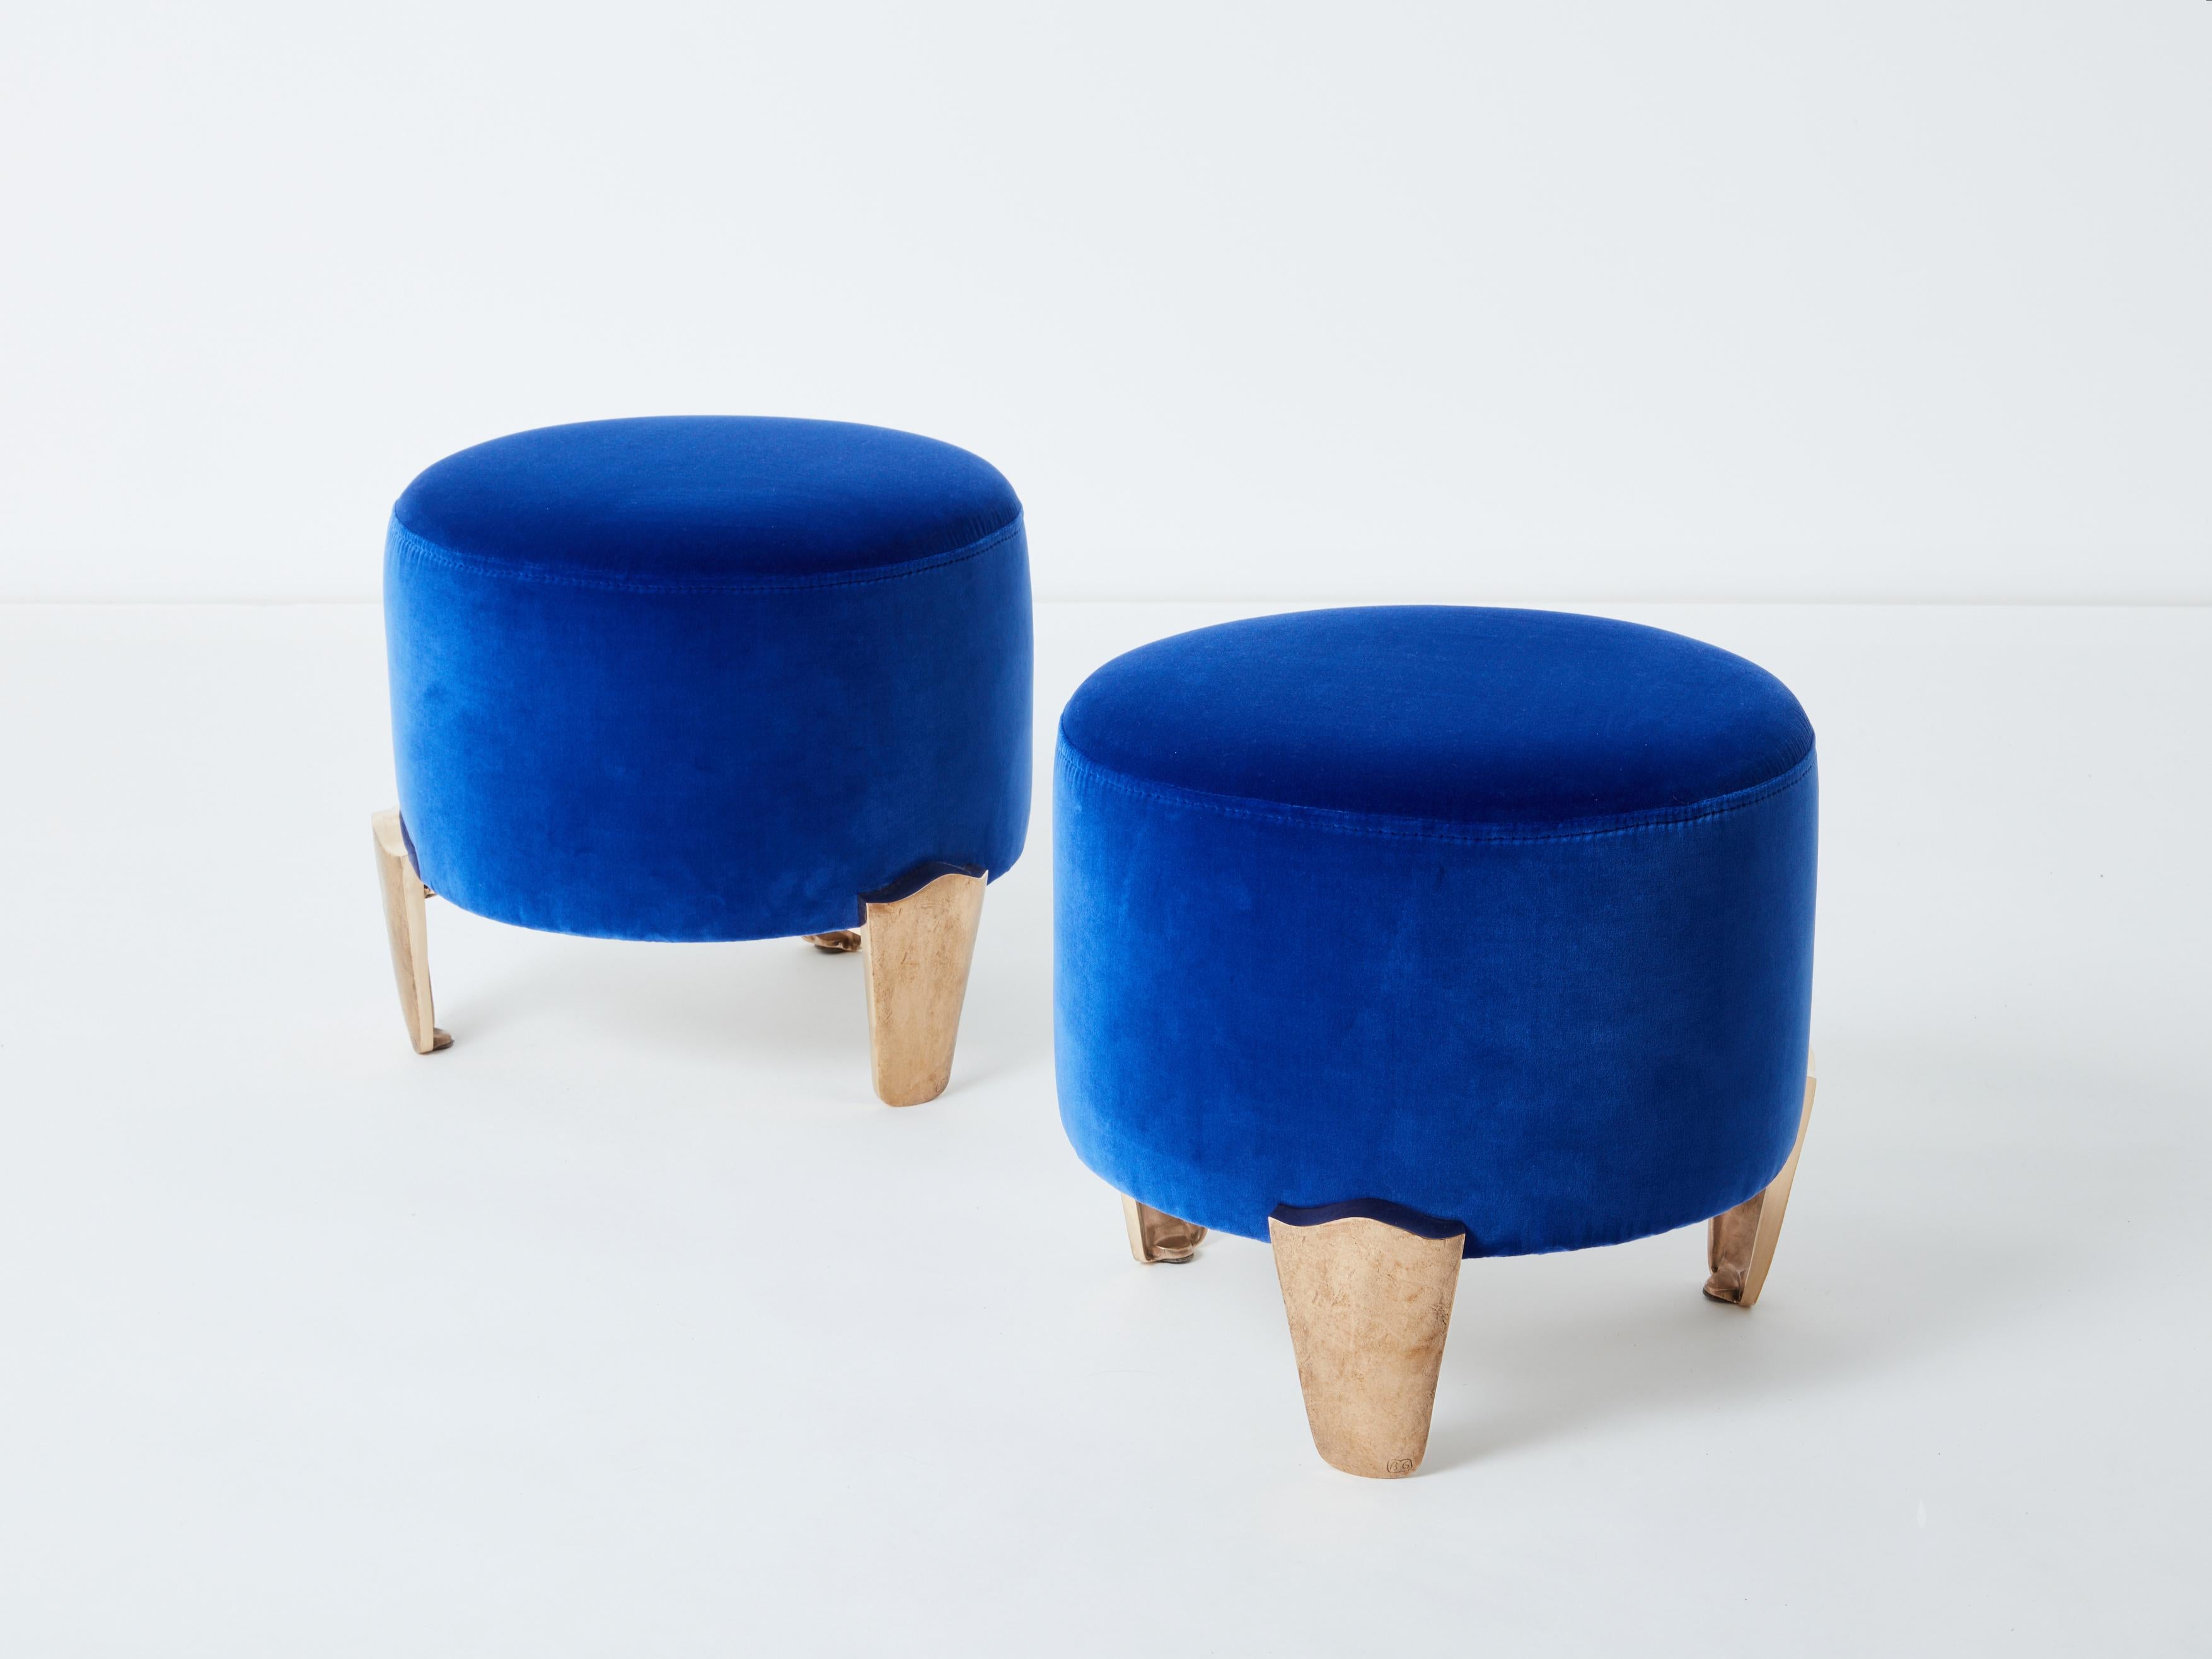 This is a beautiful pair of stools by Elizabeth Garouste & Mattia Bonetti, model Koala, with solid bronze feet, fully restored and reupholstered. Garouste & Bonetti began their collaboration and gained global recognition for their interior design of